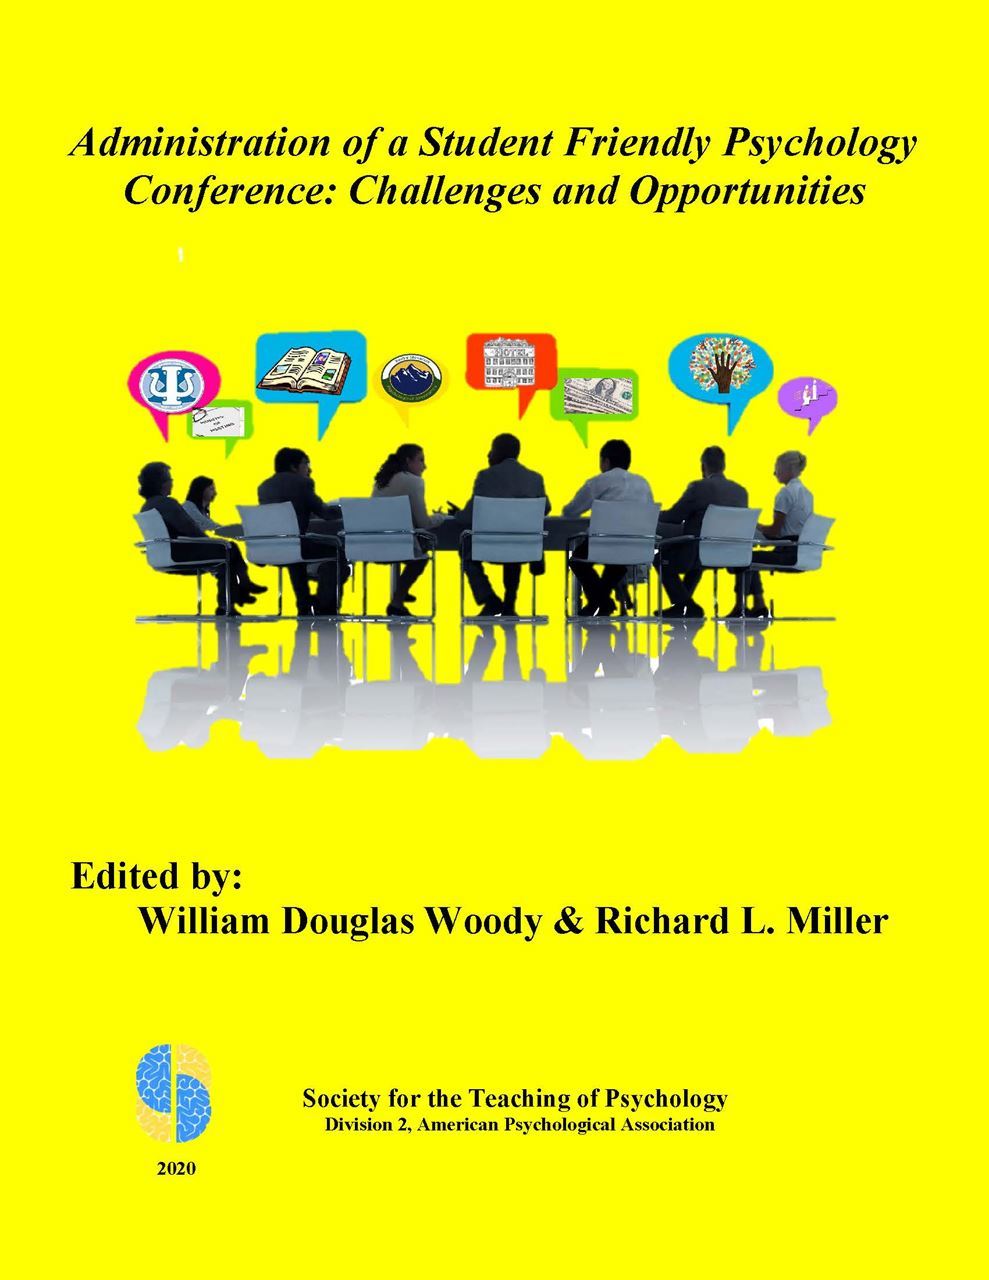 Administration of a Student Friendly Psychology Conference: Challenges and Opportunities